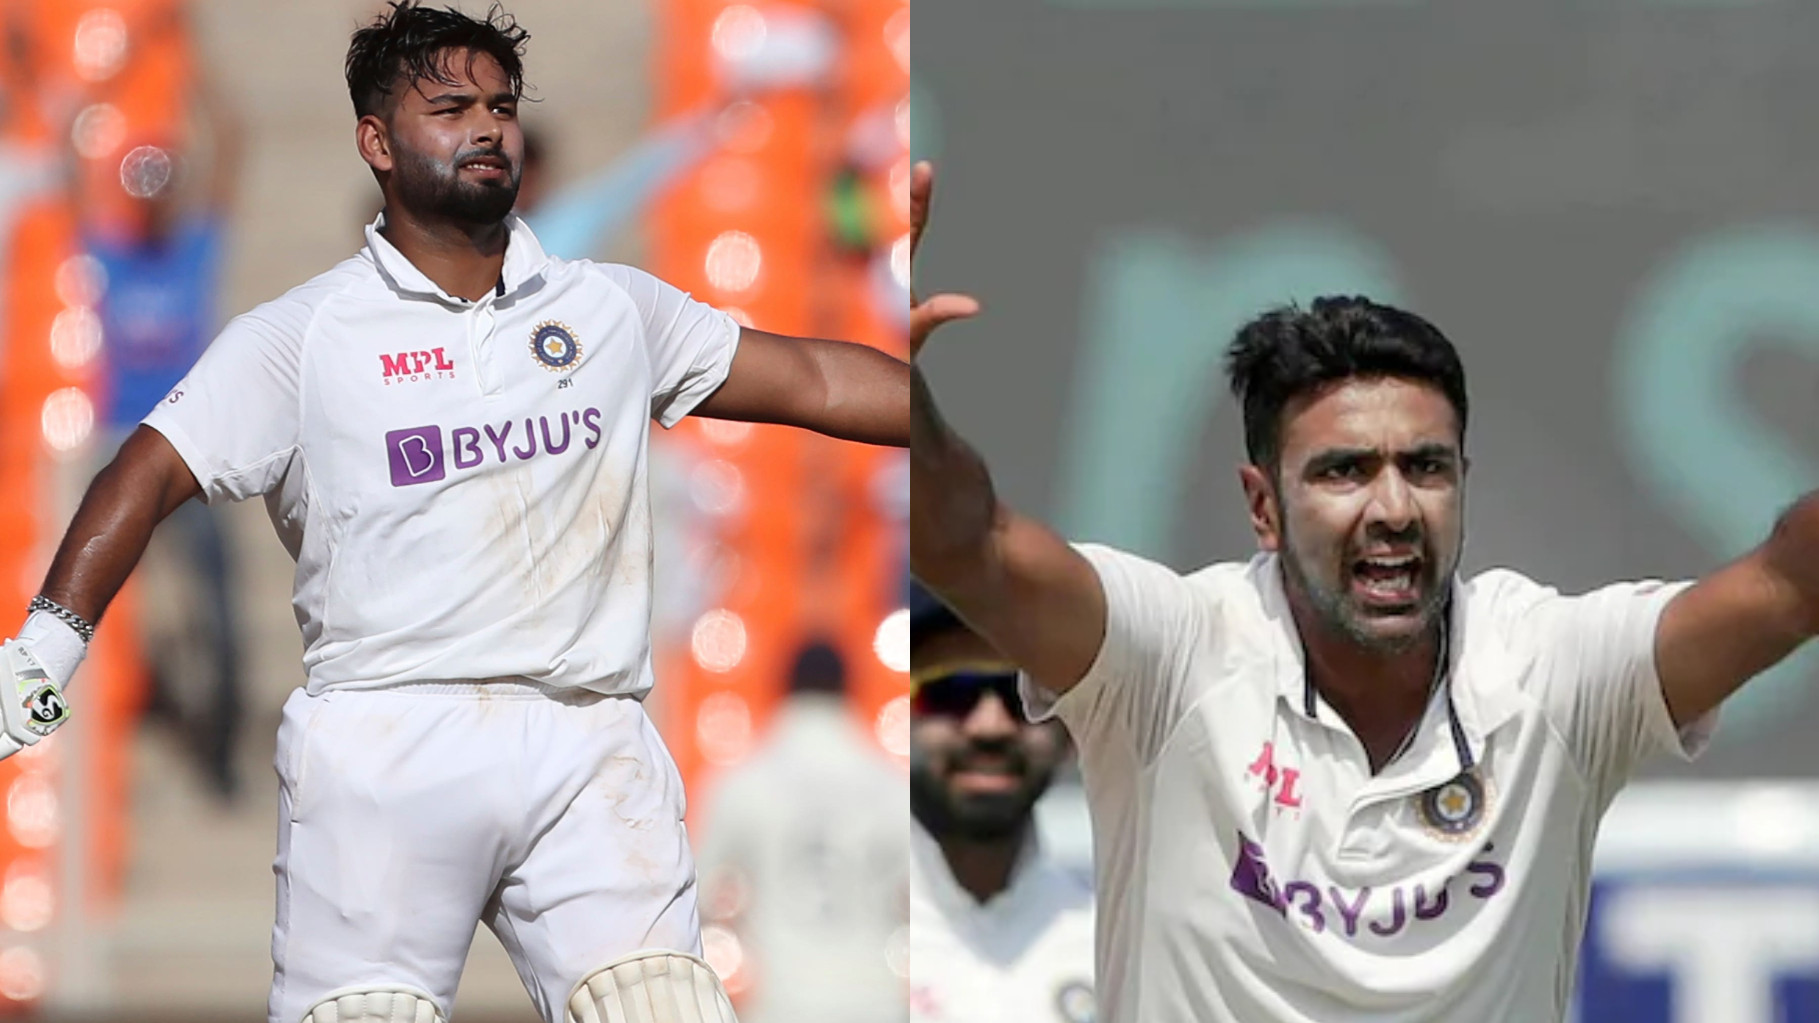 Rishabh Pant reaches no.7, R Ashwin moves to no.2 in latest ICC Test player rankings